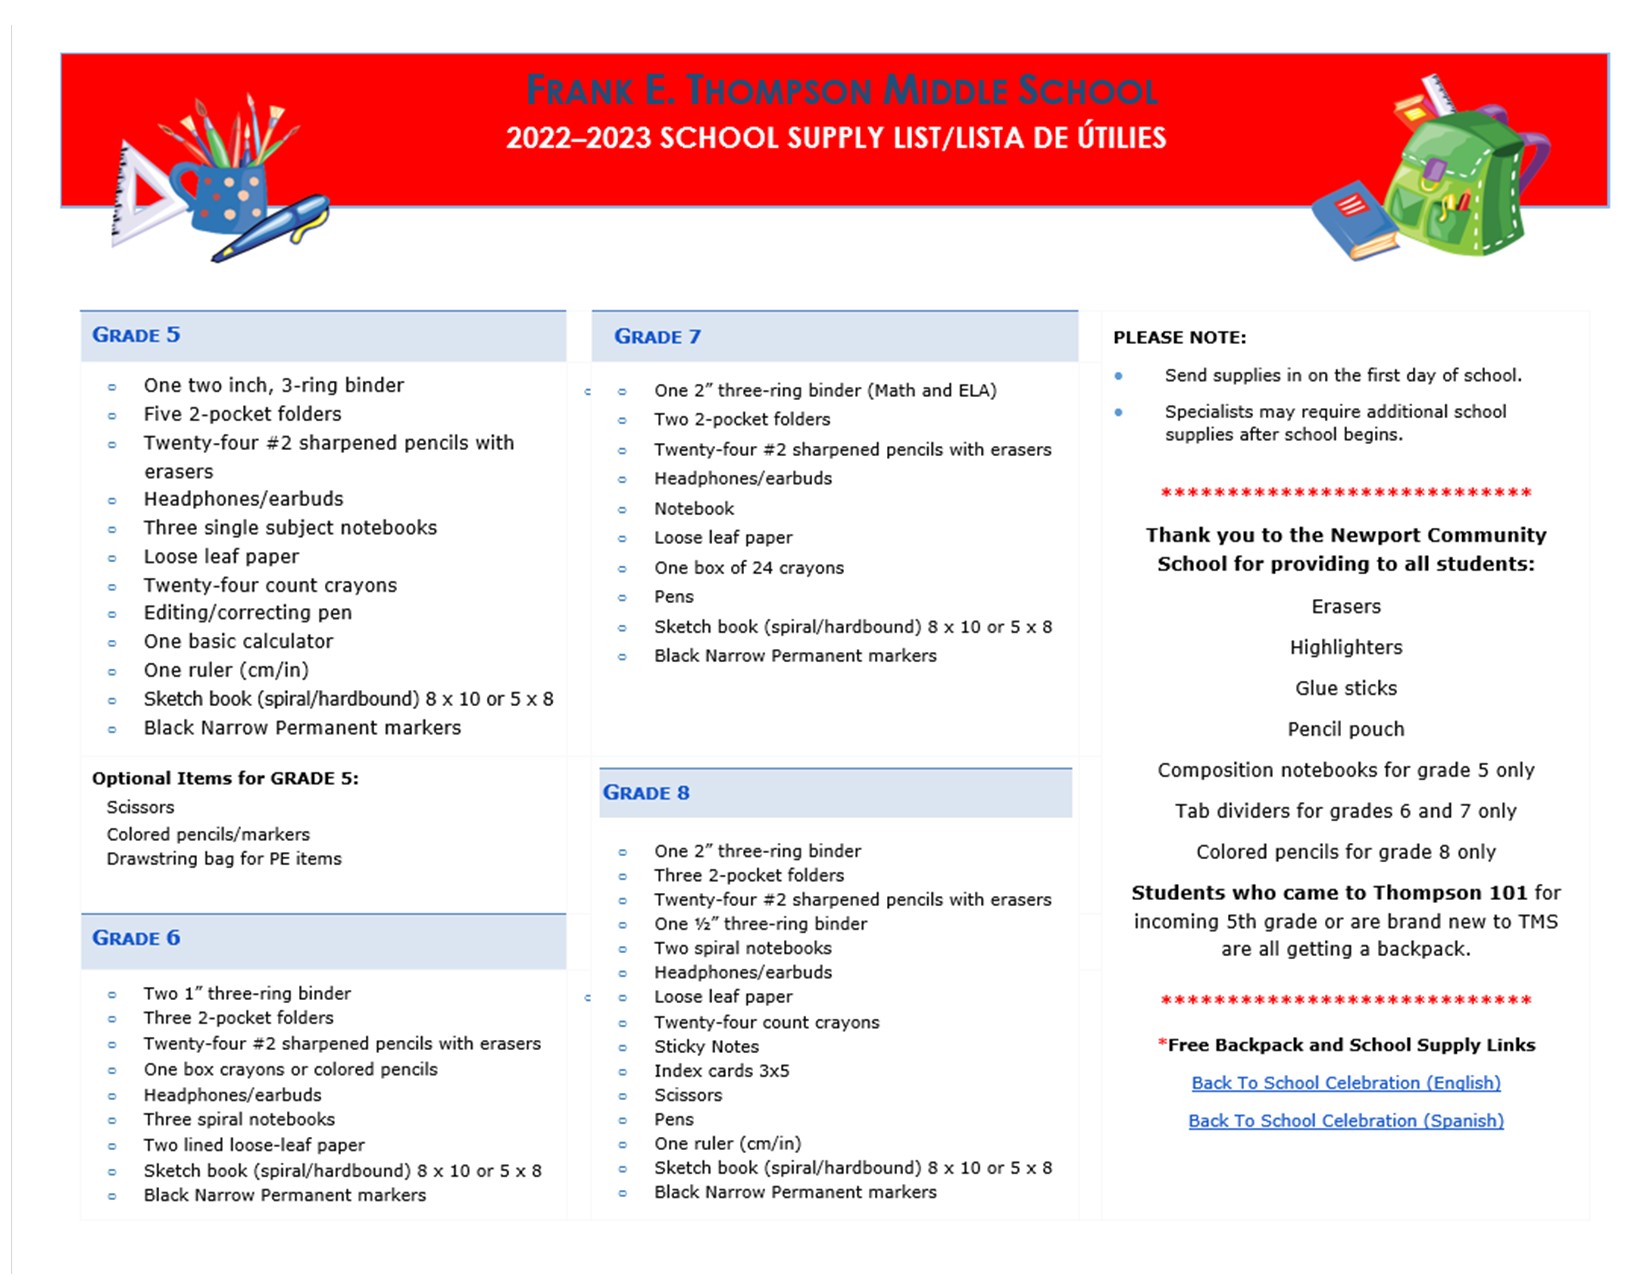 School Supply list for parents 22-23 SY